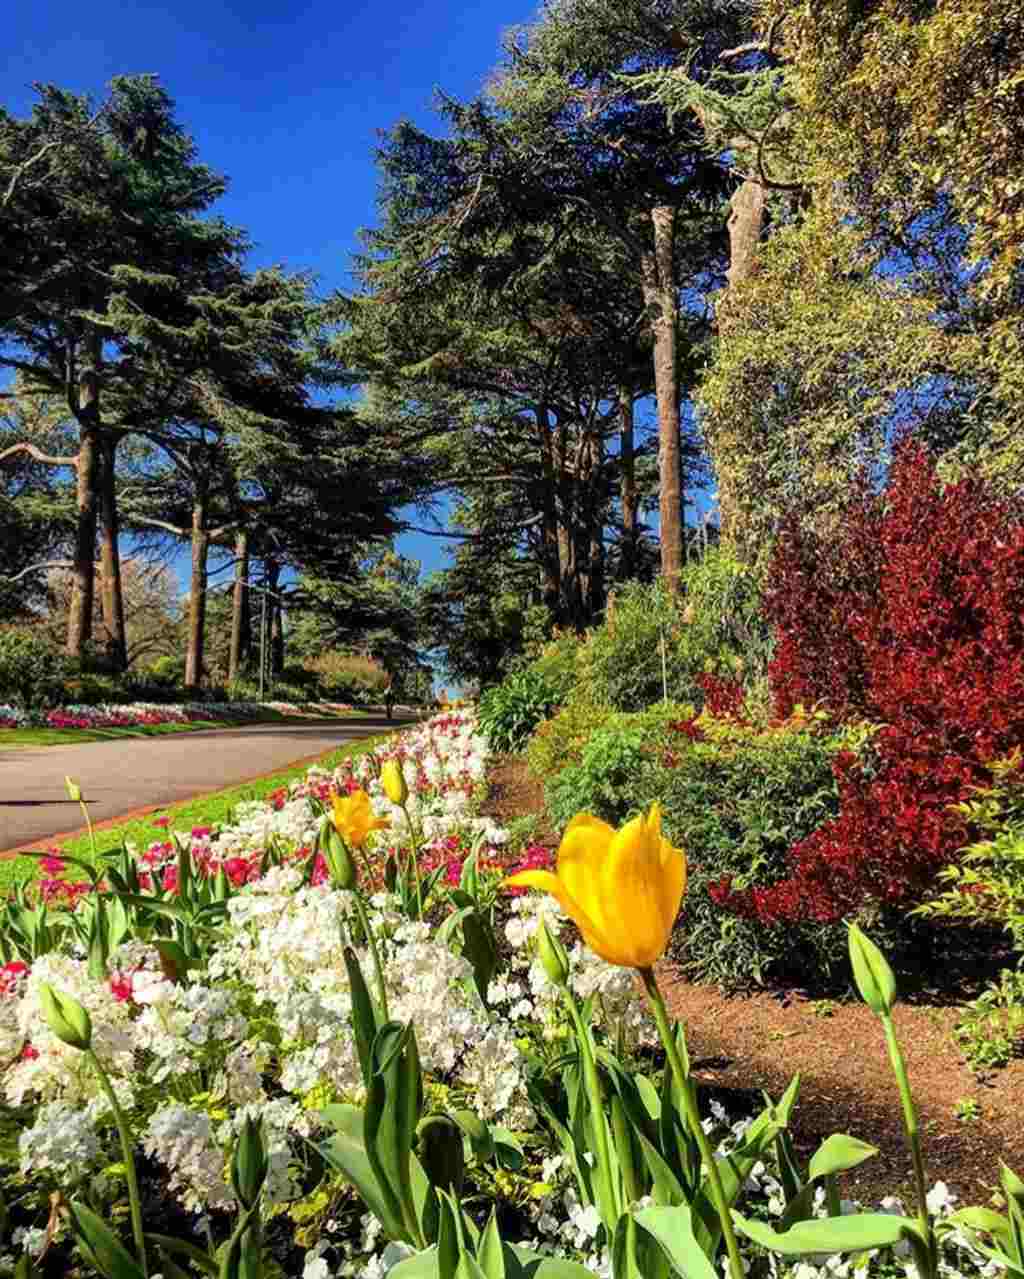 An outdoor garden with flowers in the foreground